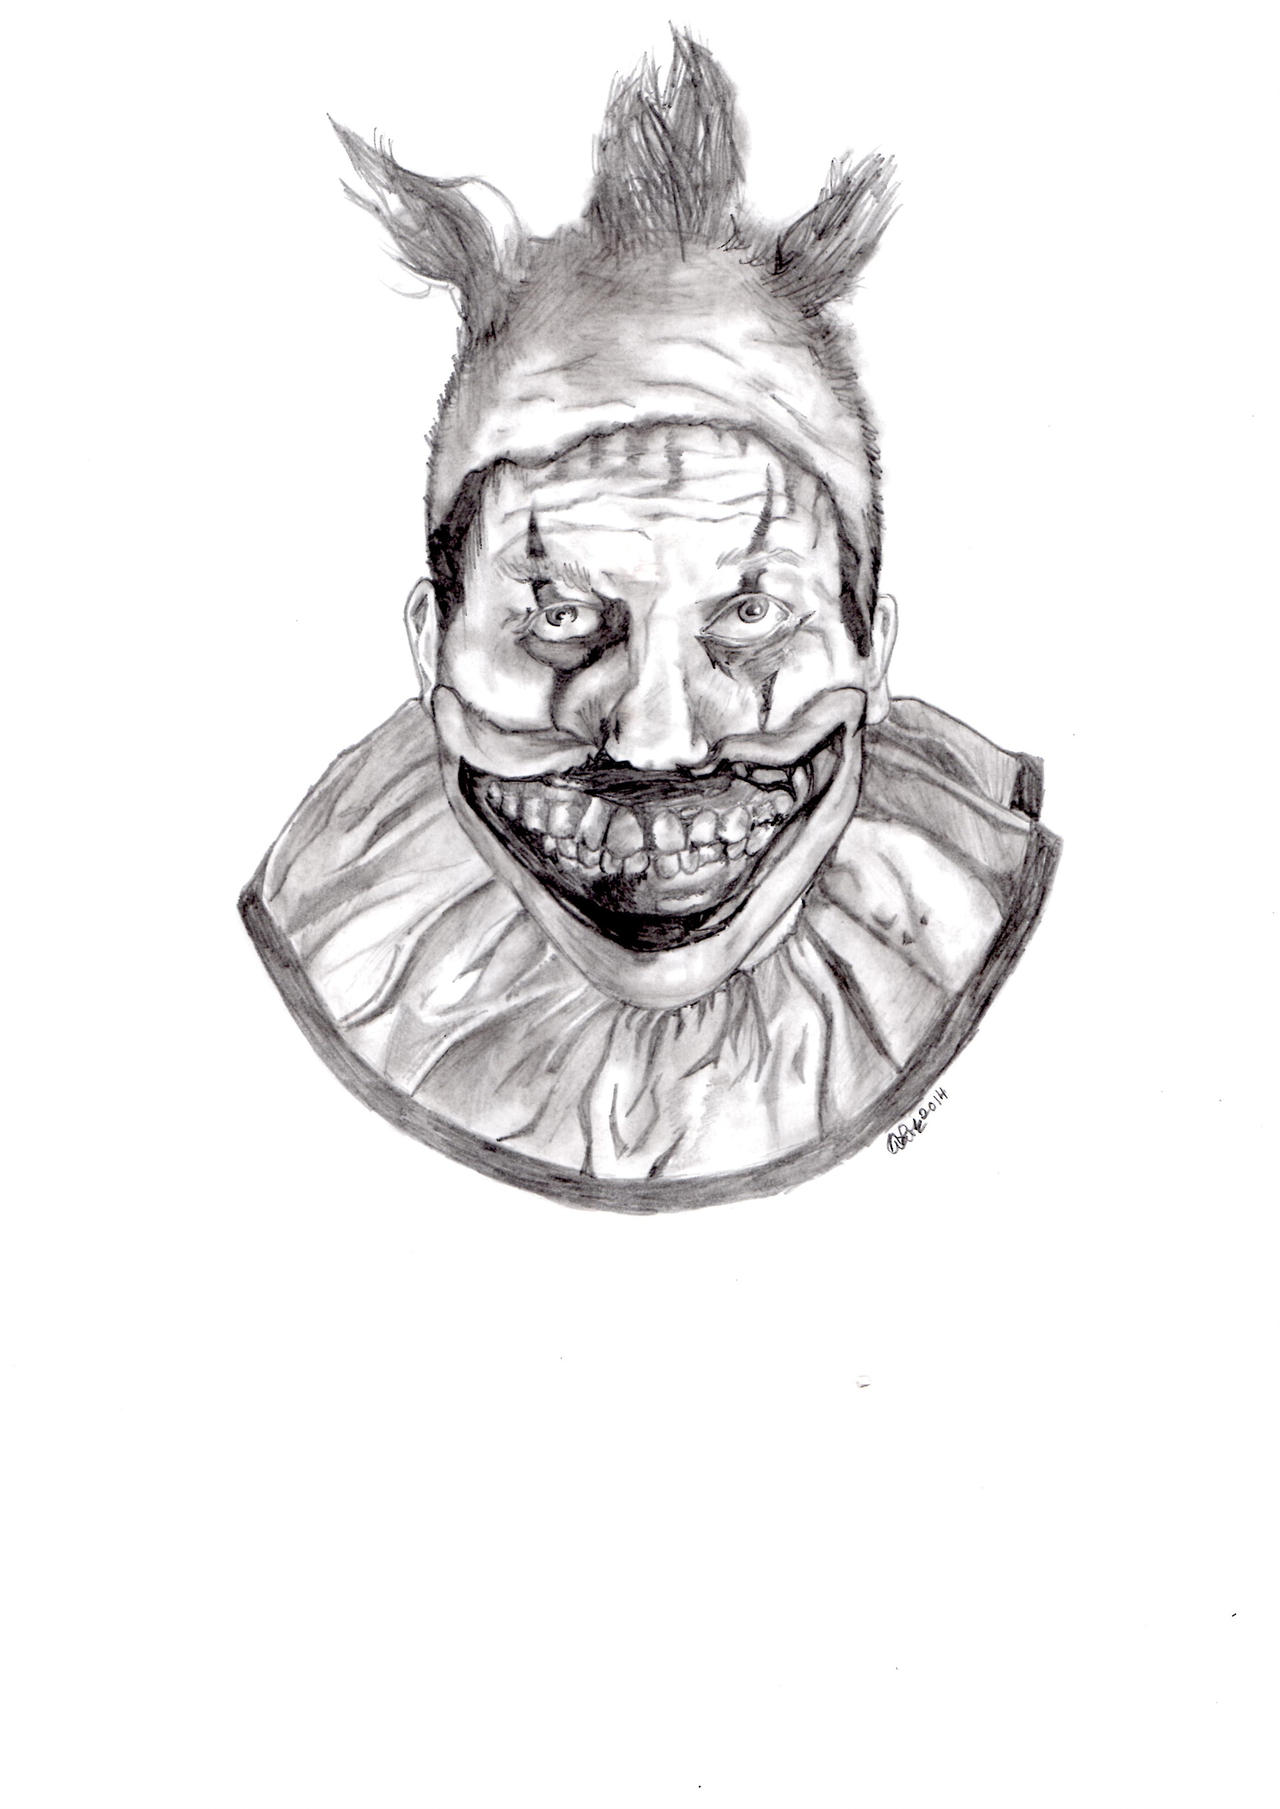 Twisty The Clown From American Horror Story - Twisty The Clown Drawing. 